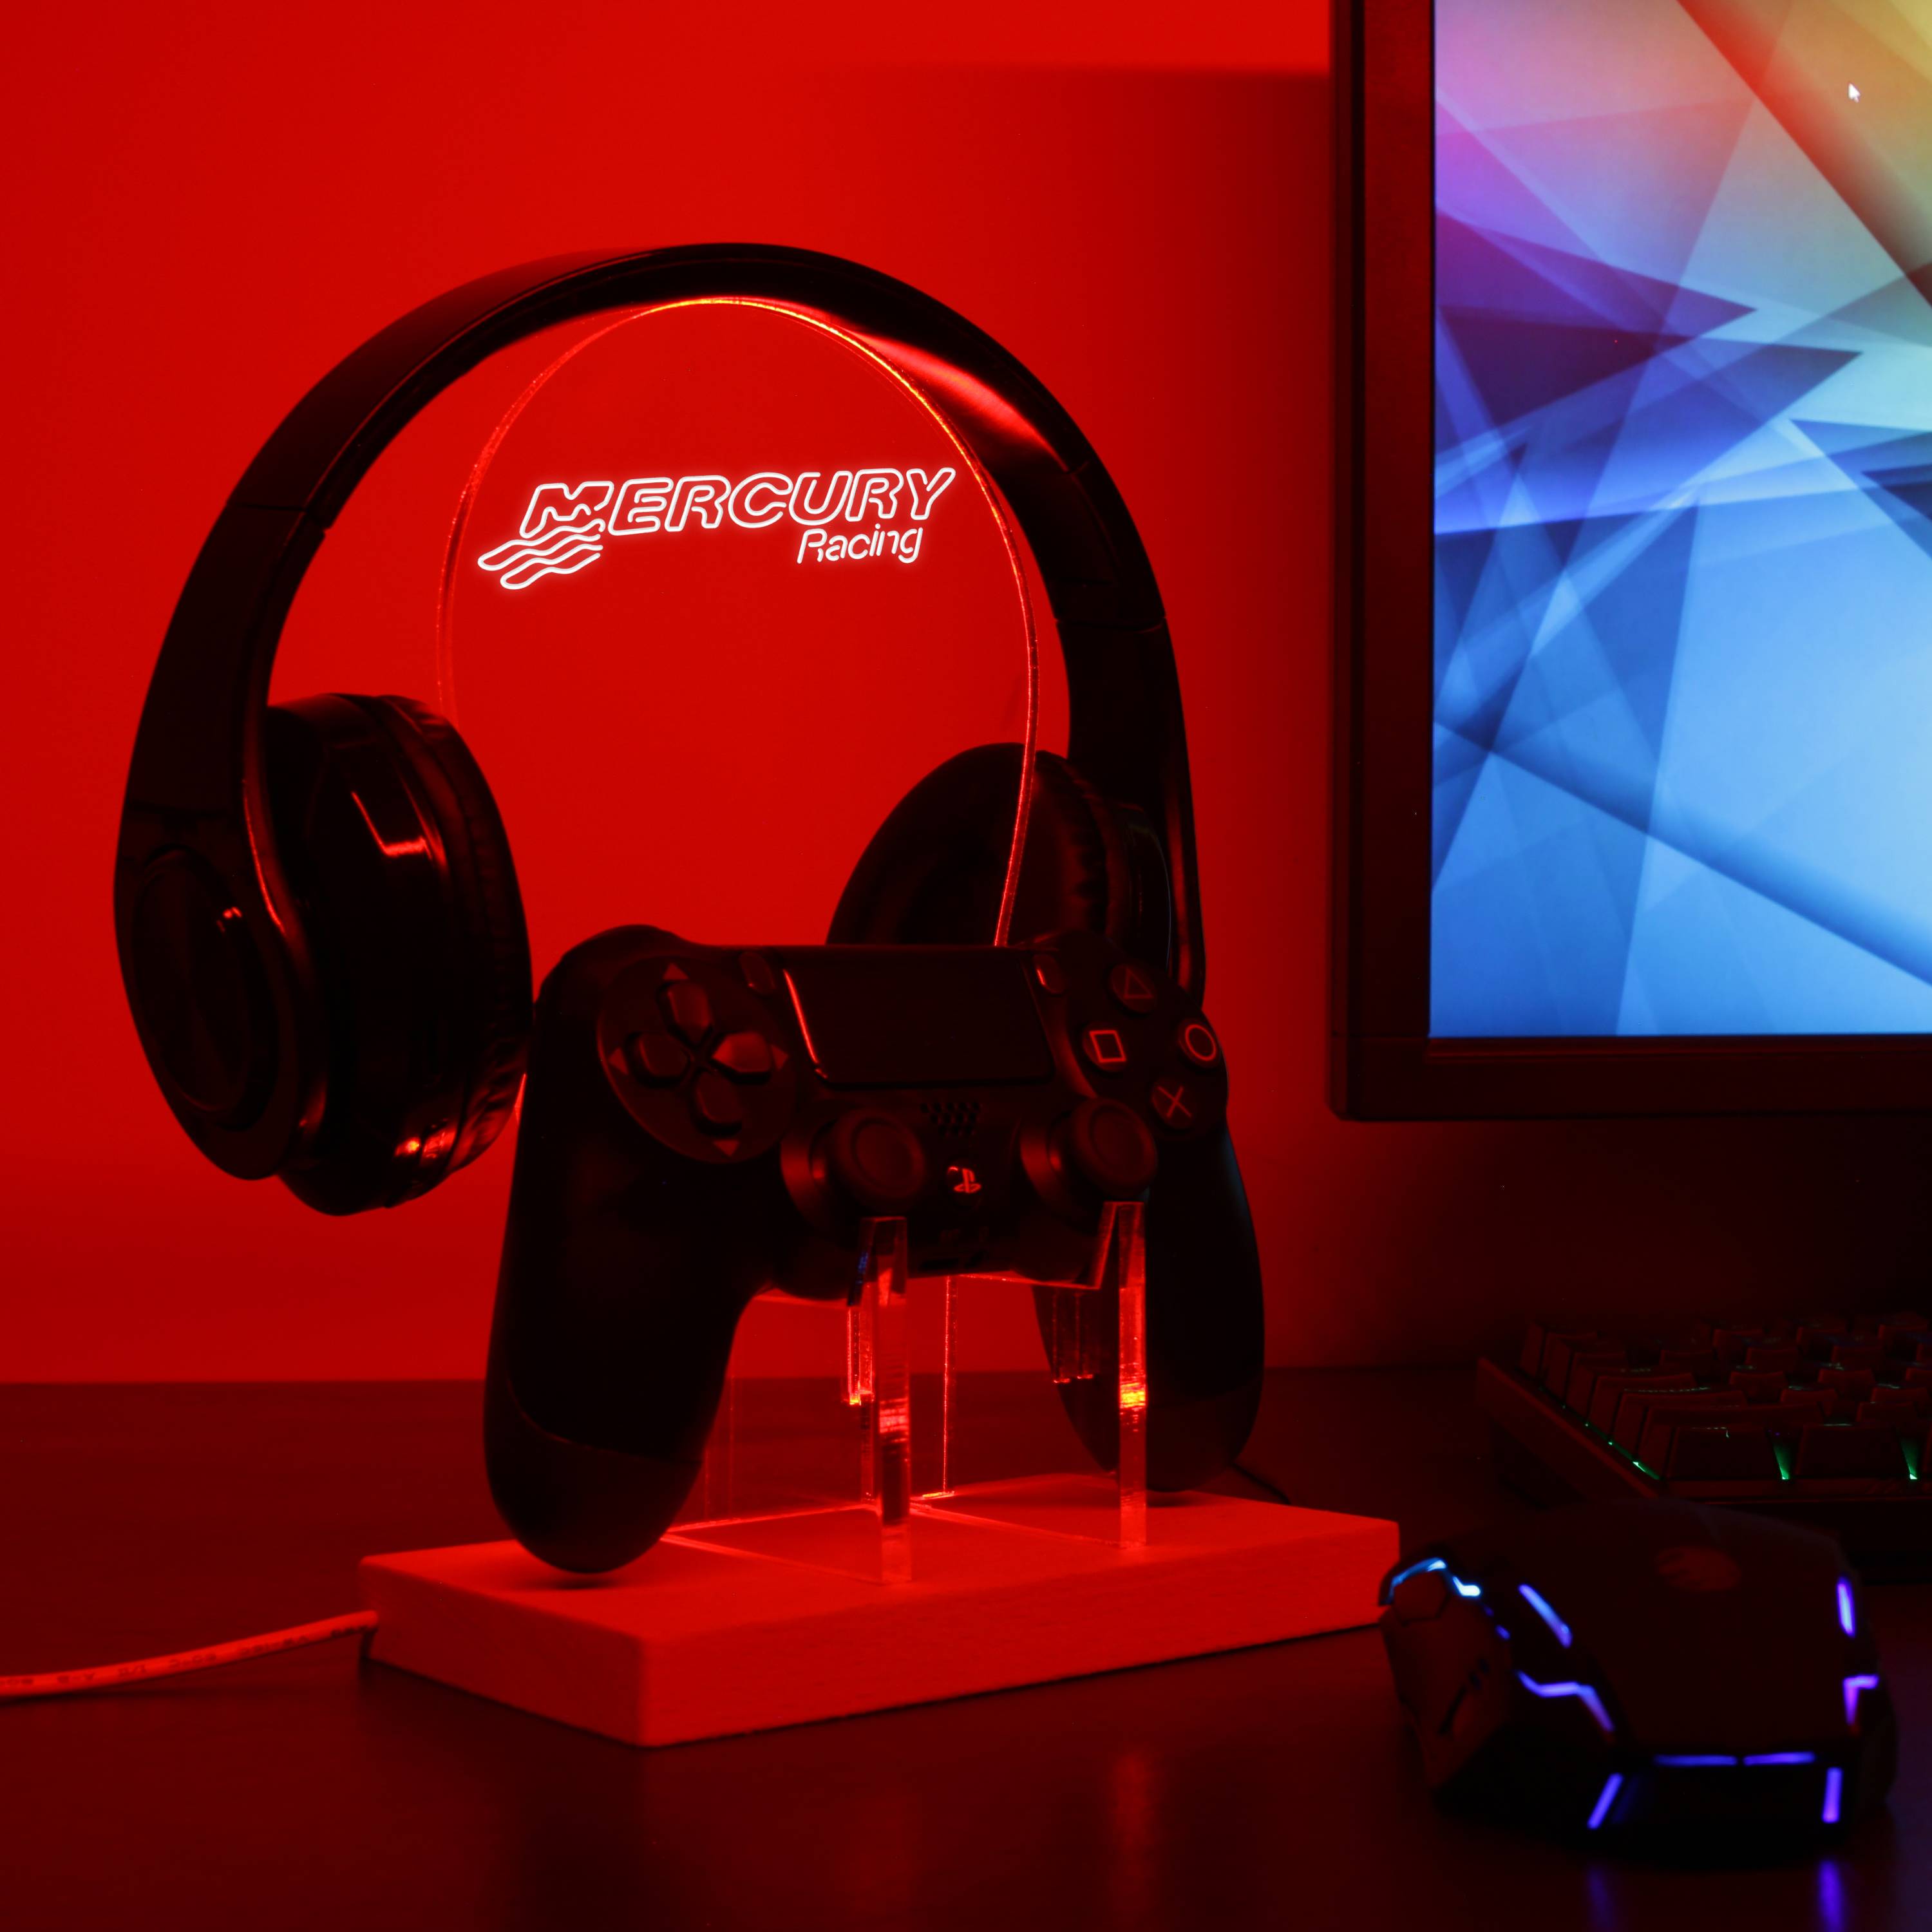 Mercury Racing LED Gaming Headset Controller Stand